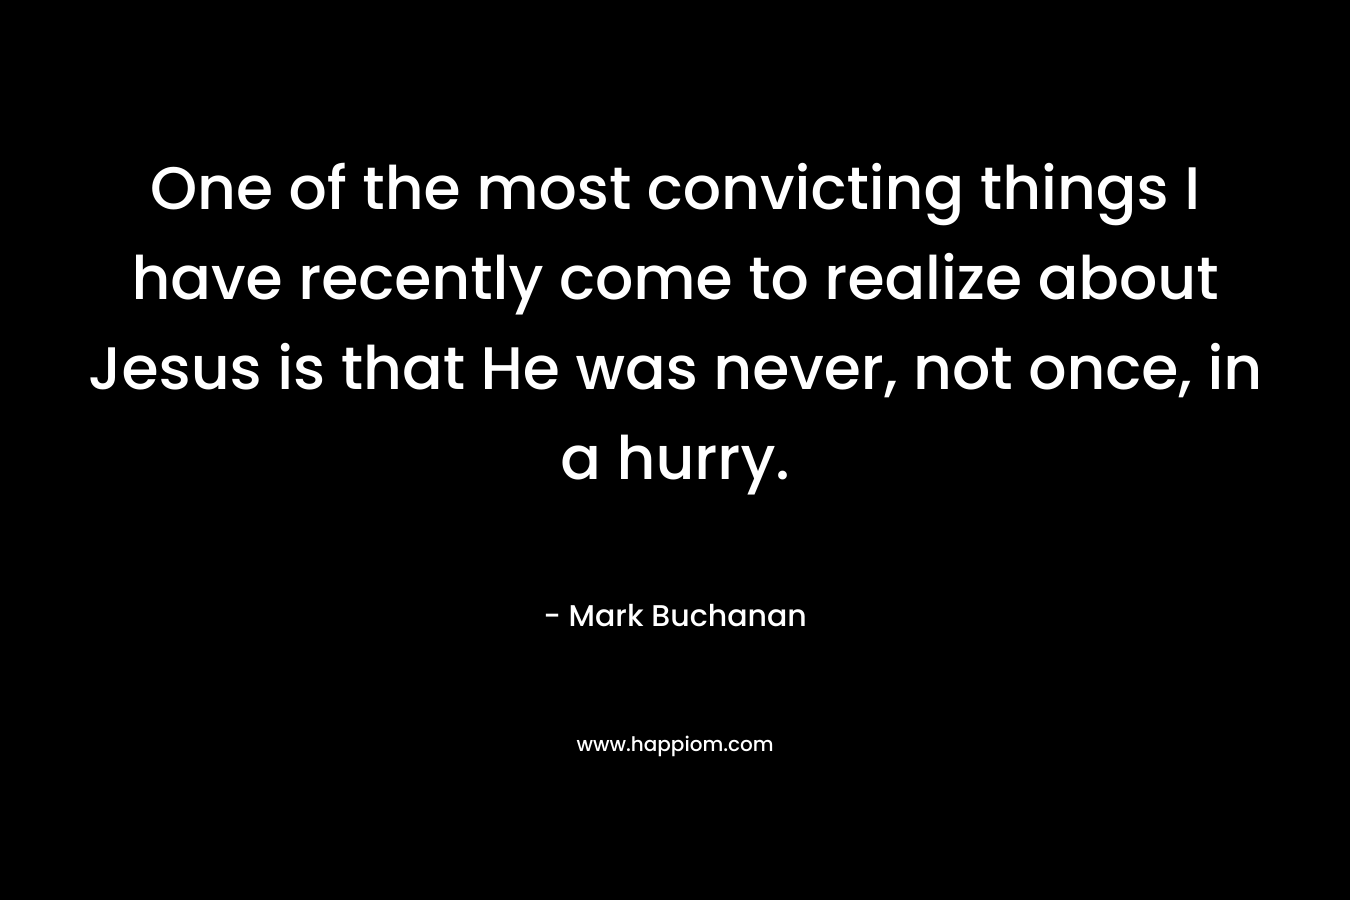 One of the most convicting things I have recently come to realize about Jesus is that He was never, not once, in a hurry.